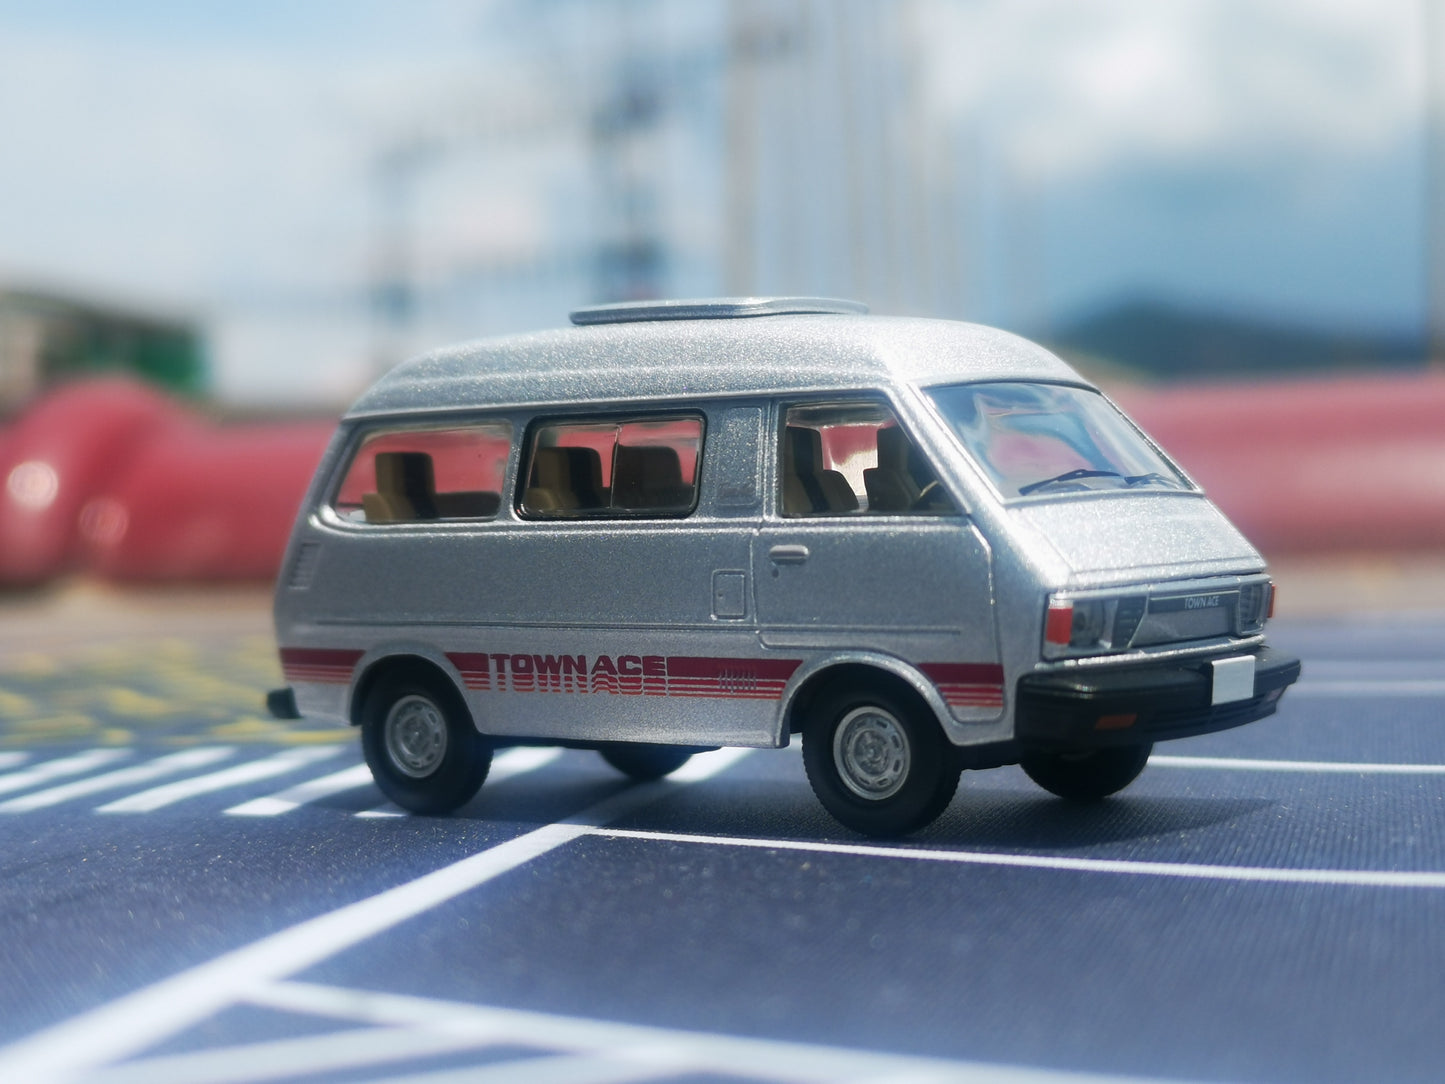 Tomica Limited Vintage Neo LV-N104c TOYOTA Town Ace Wagon 1800 Super Extra 81 Years (Silver)